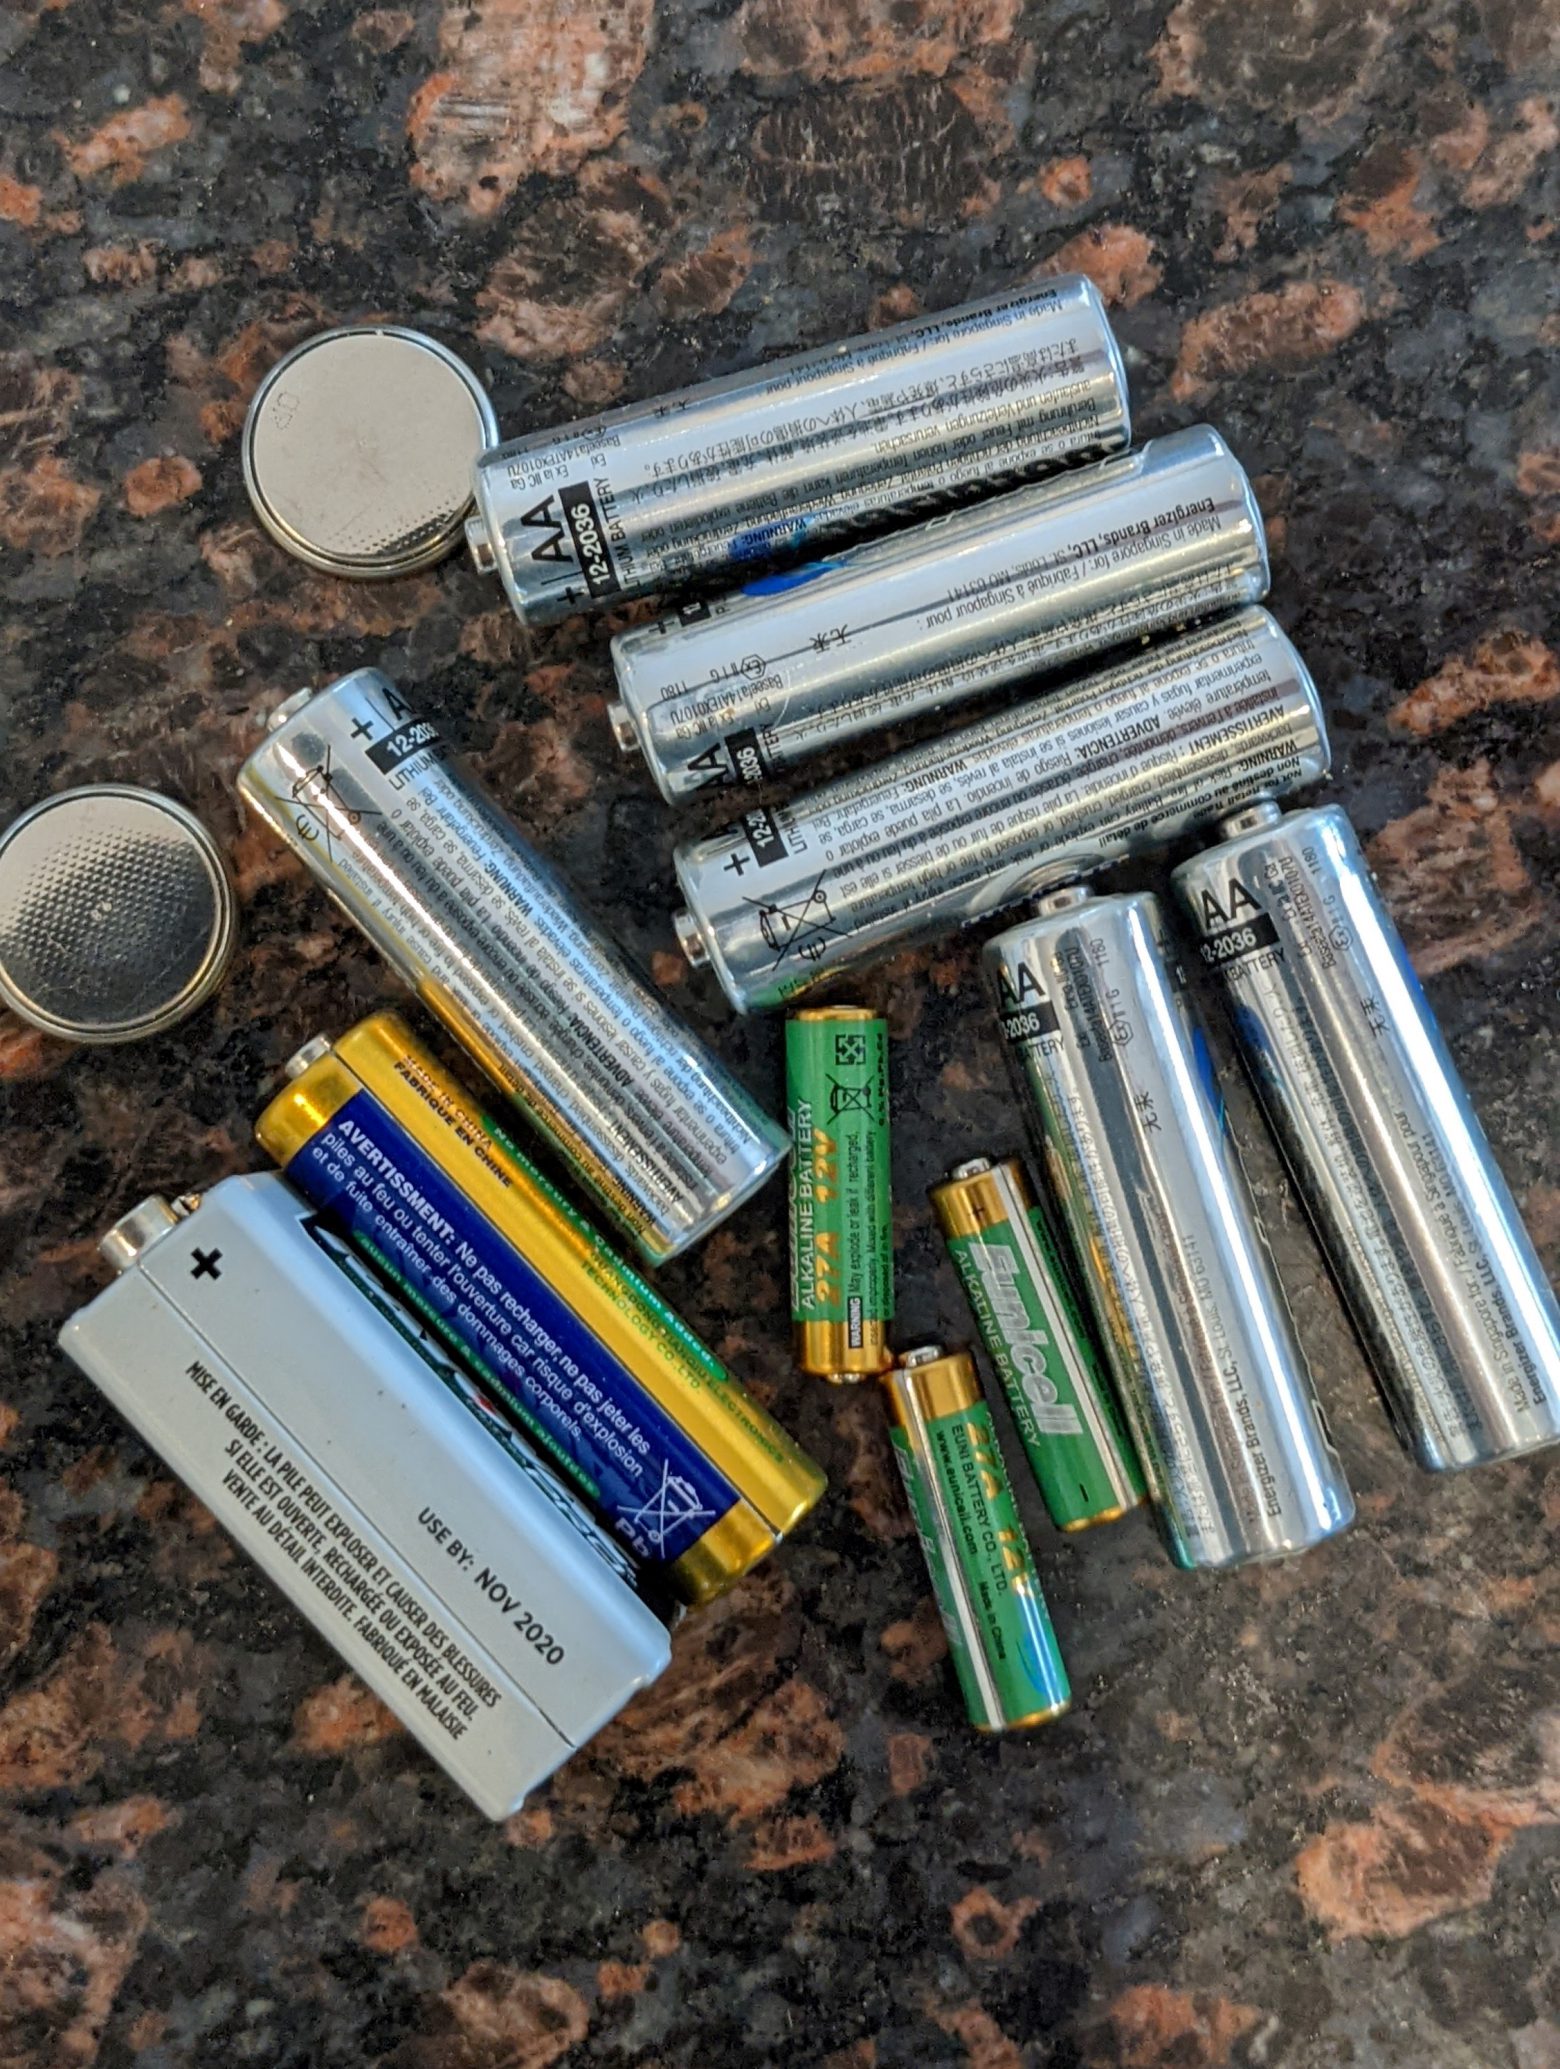 Please Recycle Batteries